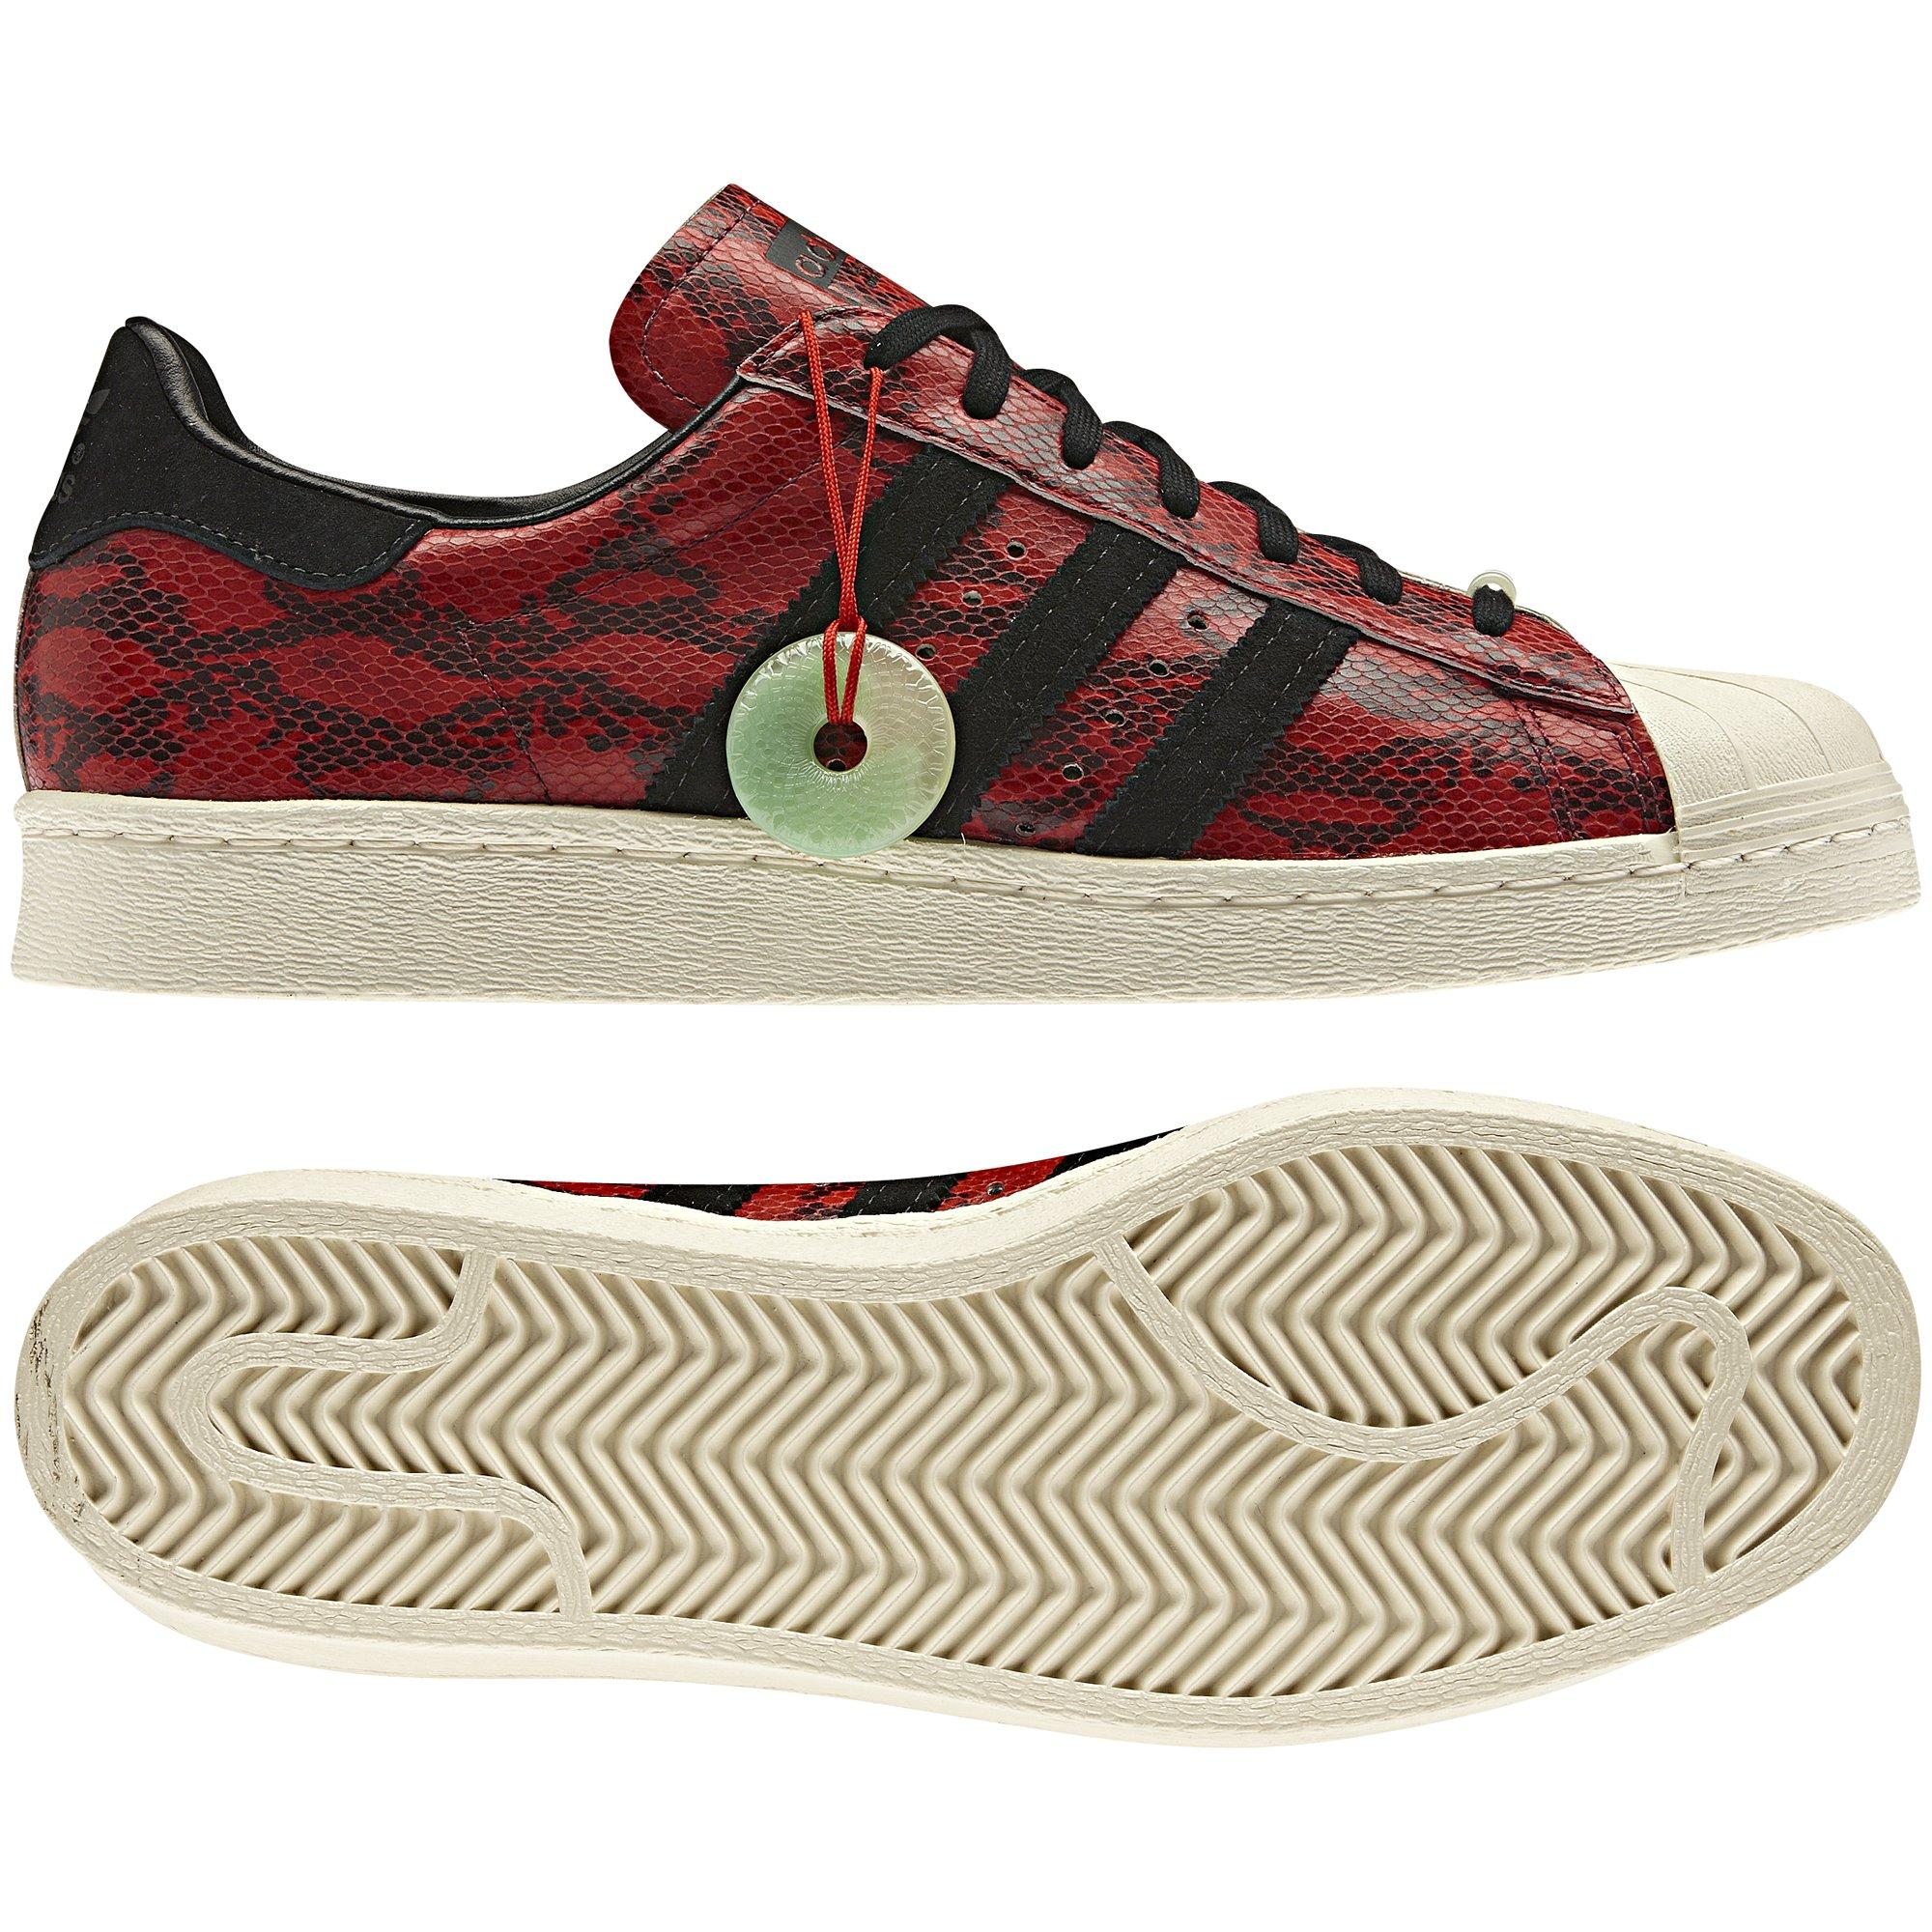 Foto adidas zapatilla Superstar 80s Chinese New Year Hombre foto 217428